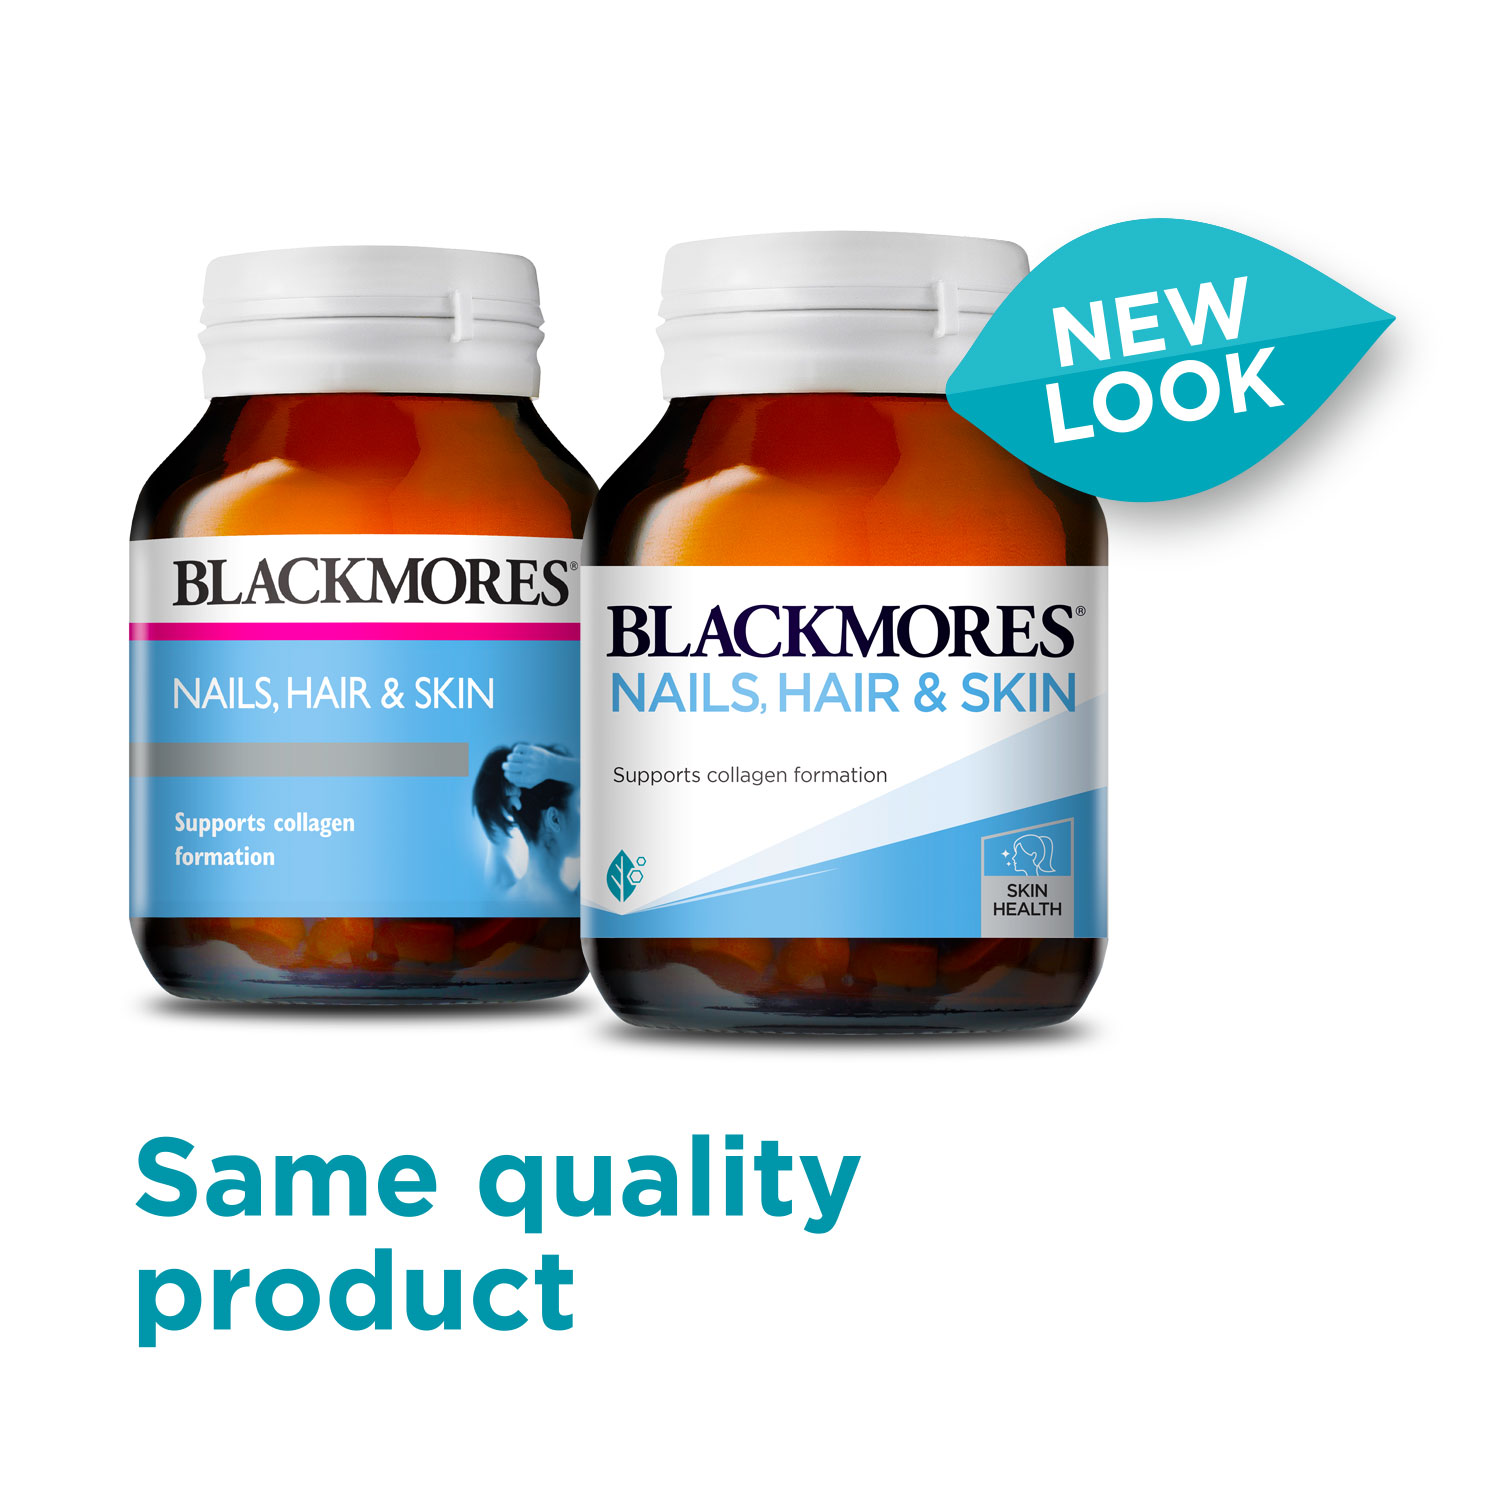 Blackmores Nails Hair and Skin new look label